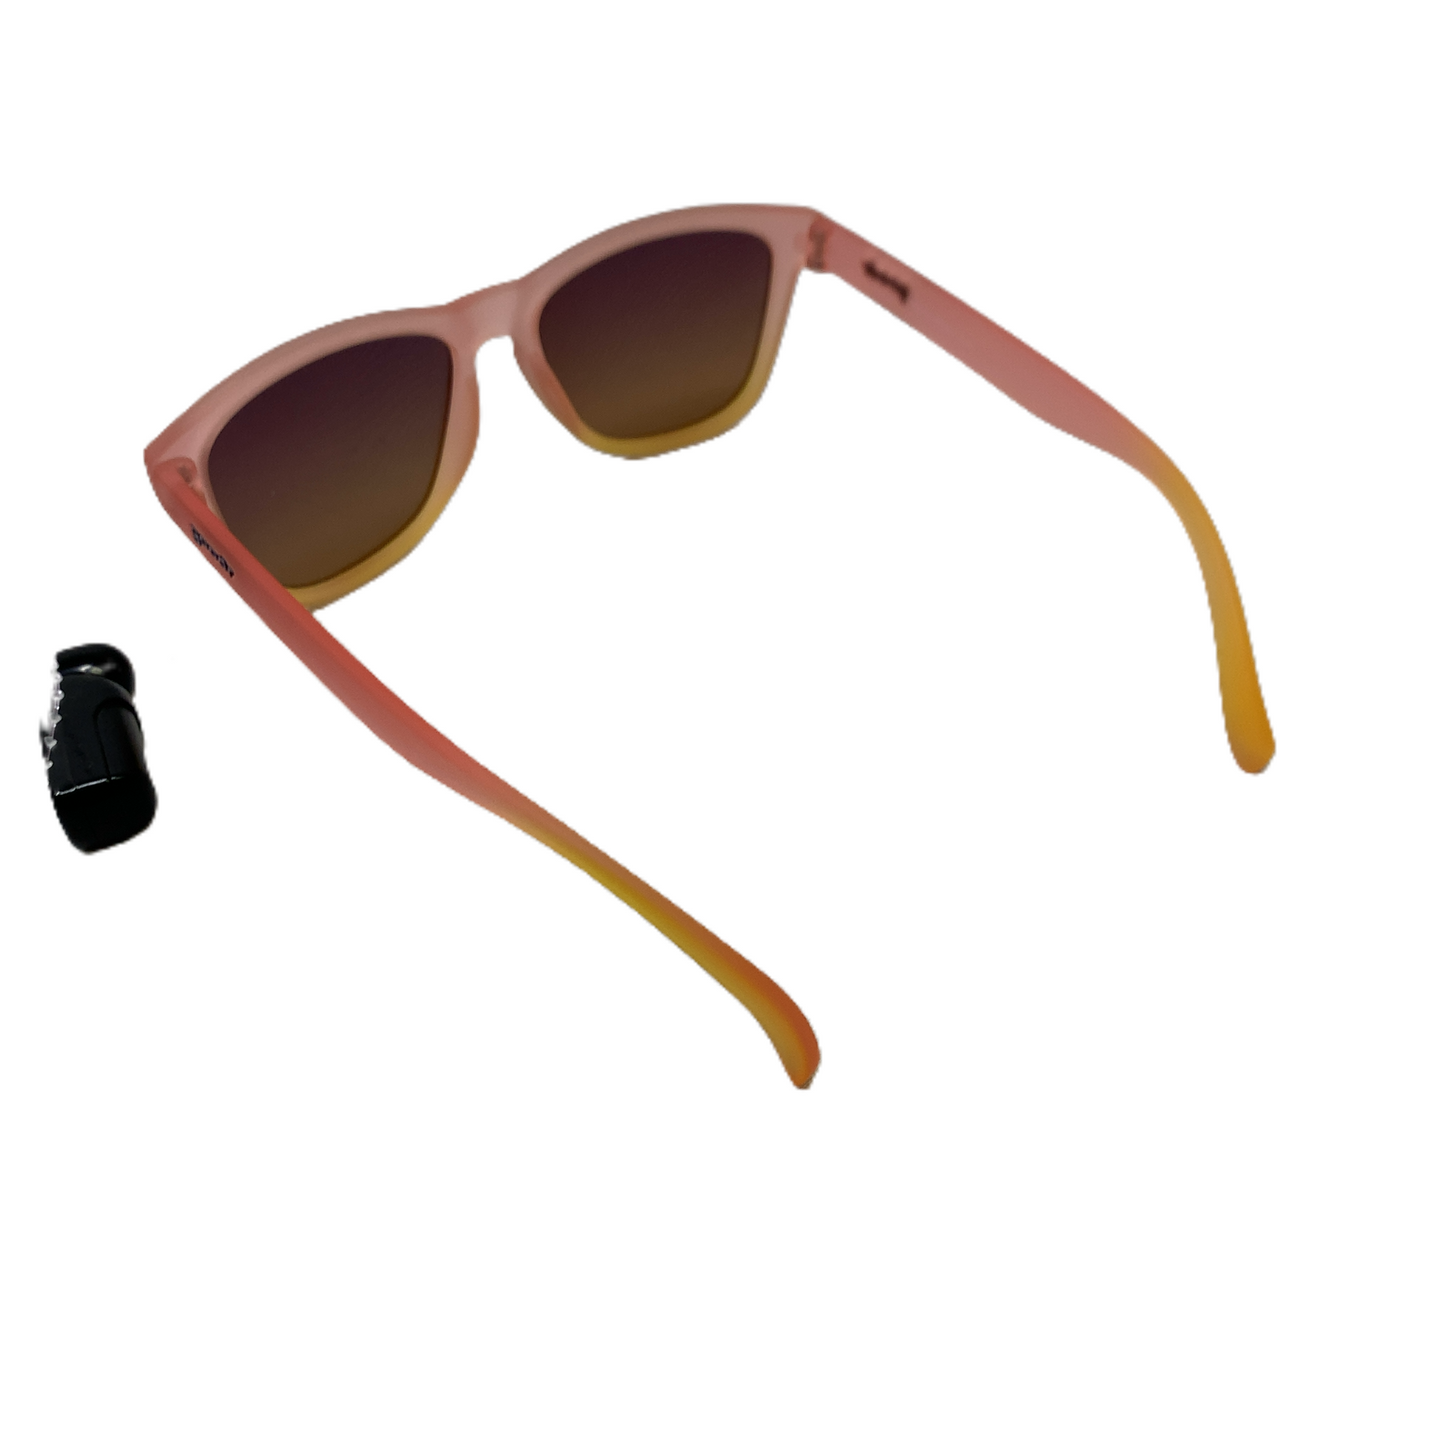 Sunglasses By Goodr